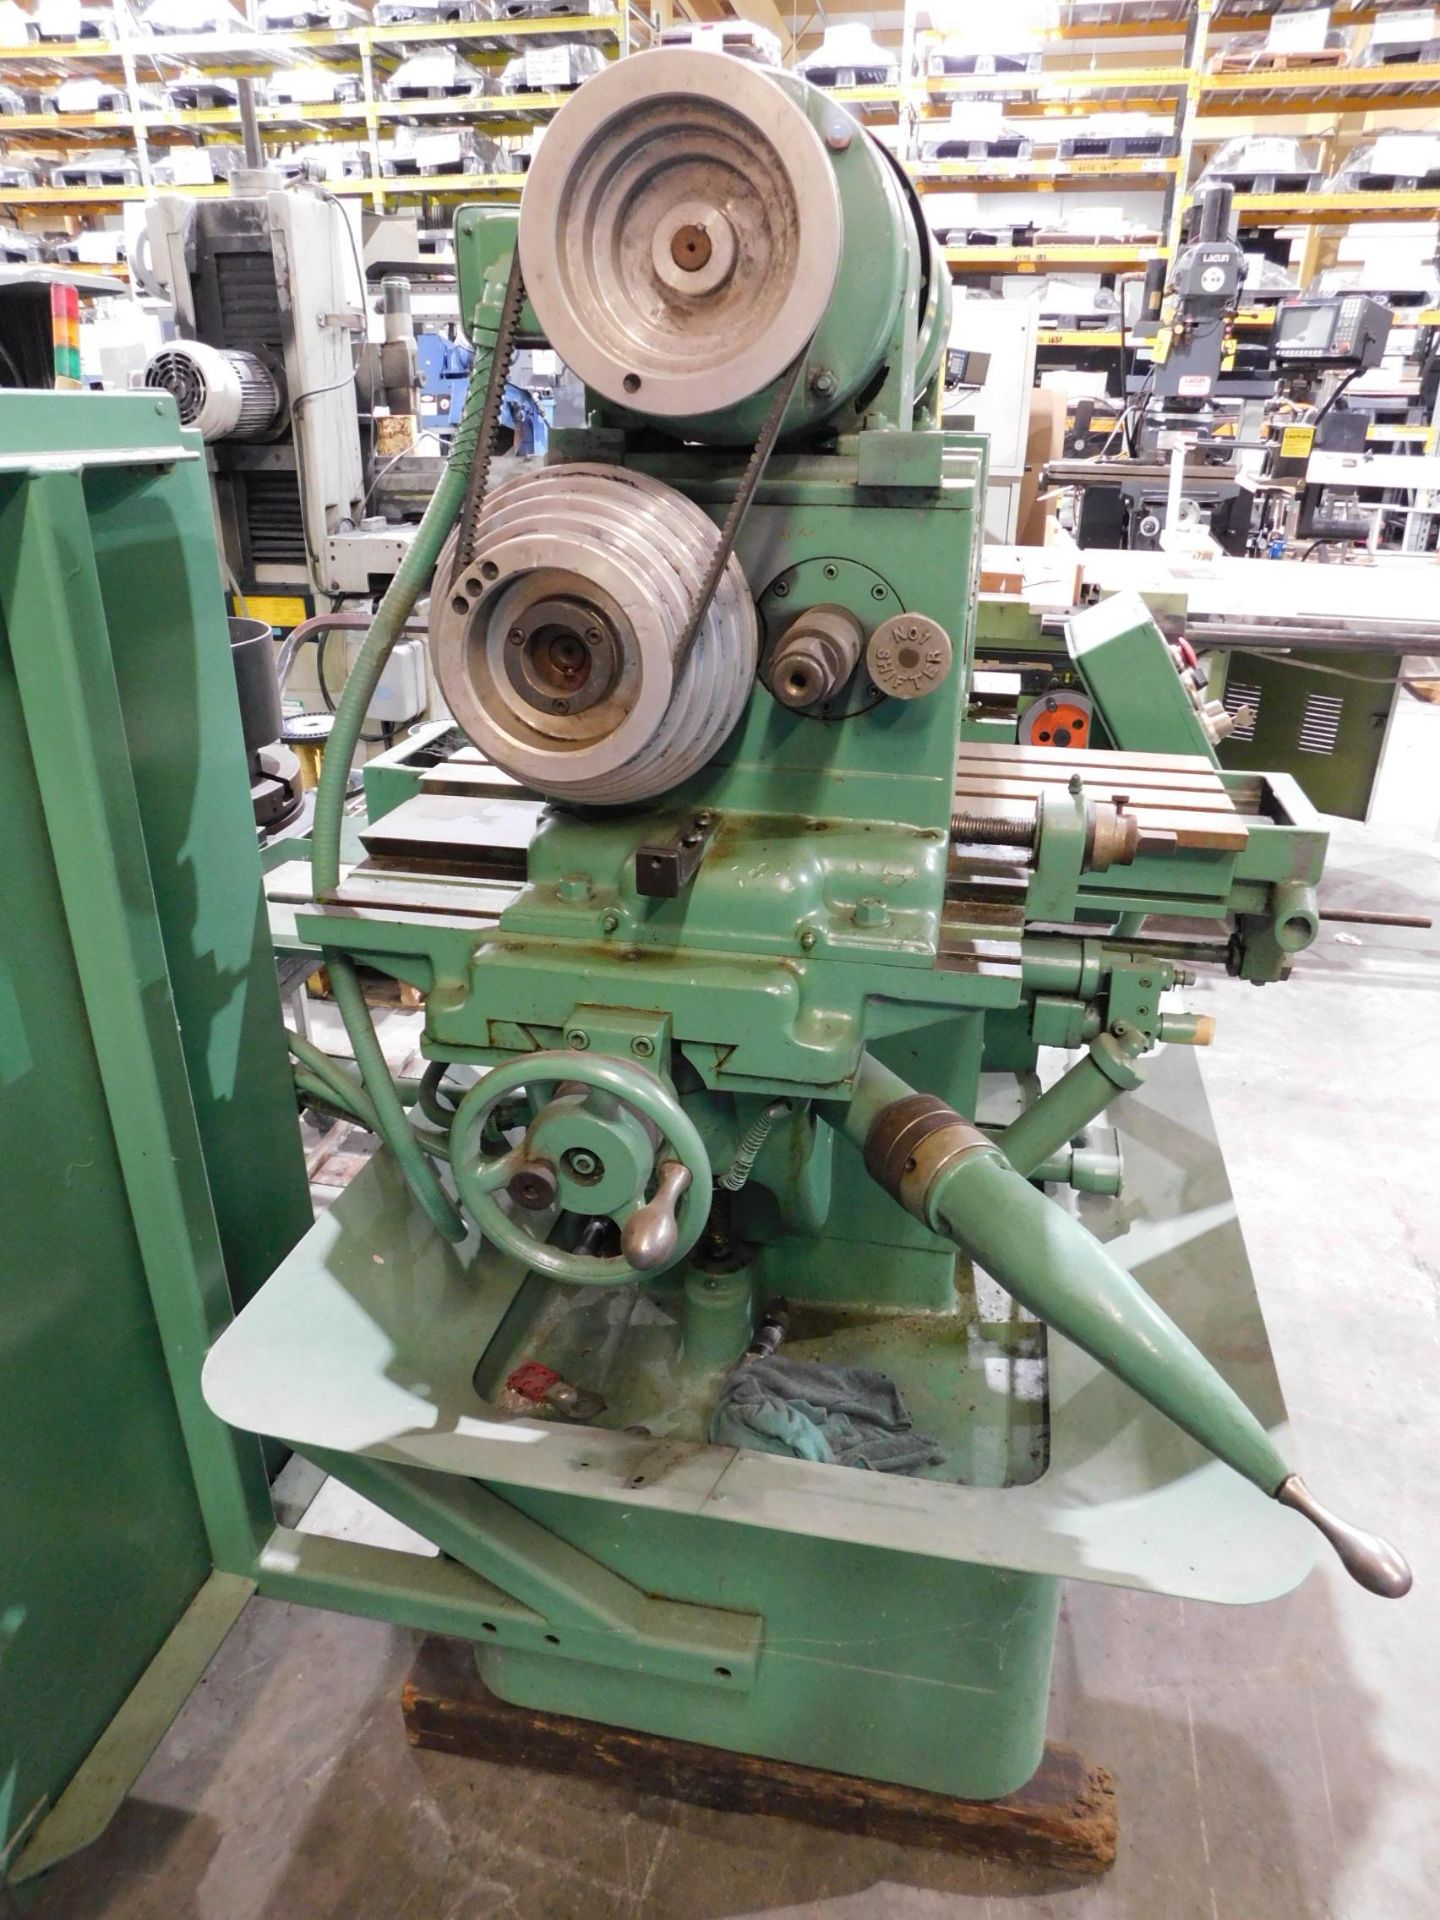 Nichols Opposed Head Horizontal Production Mill s/n TM-552, 2 HP Spindle Motors, 10"X30" Table - Image 6 of 6